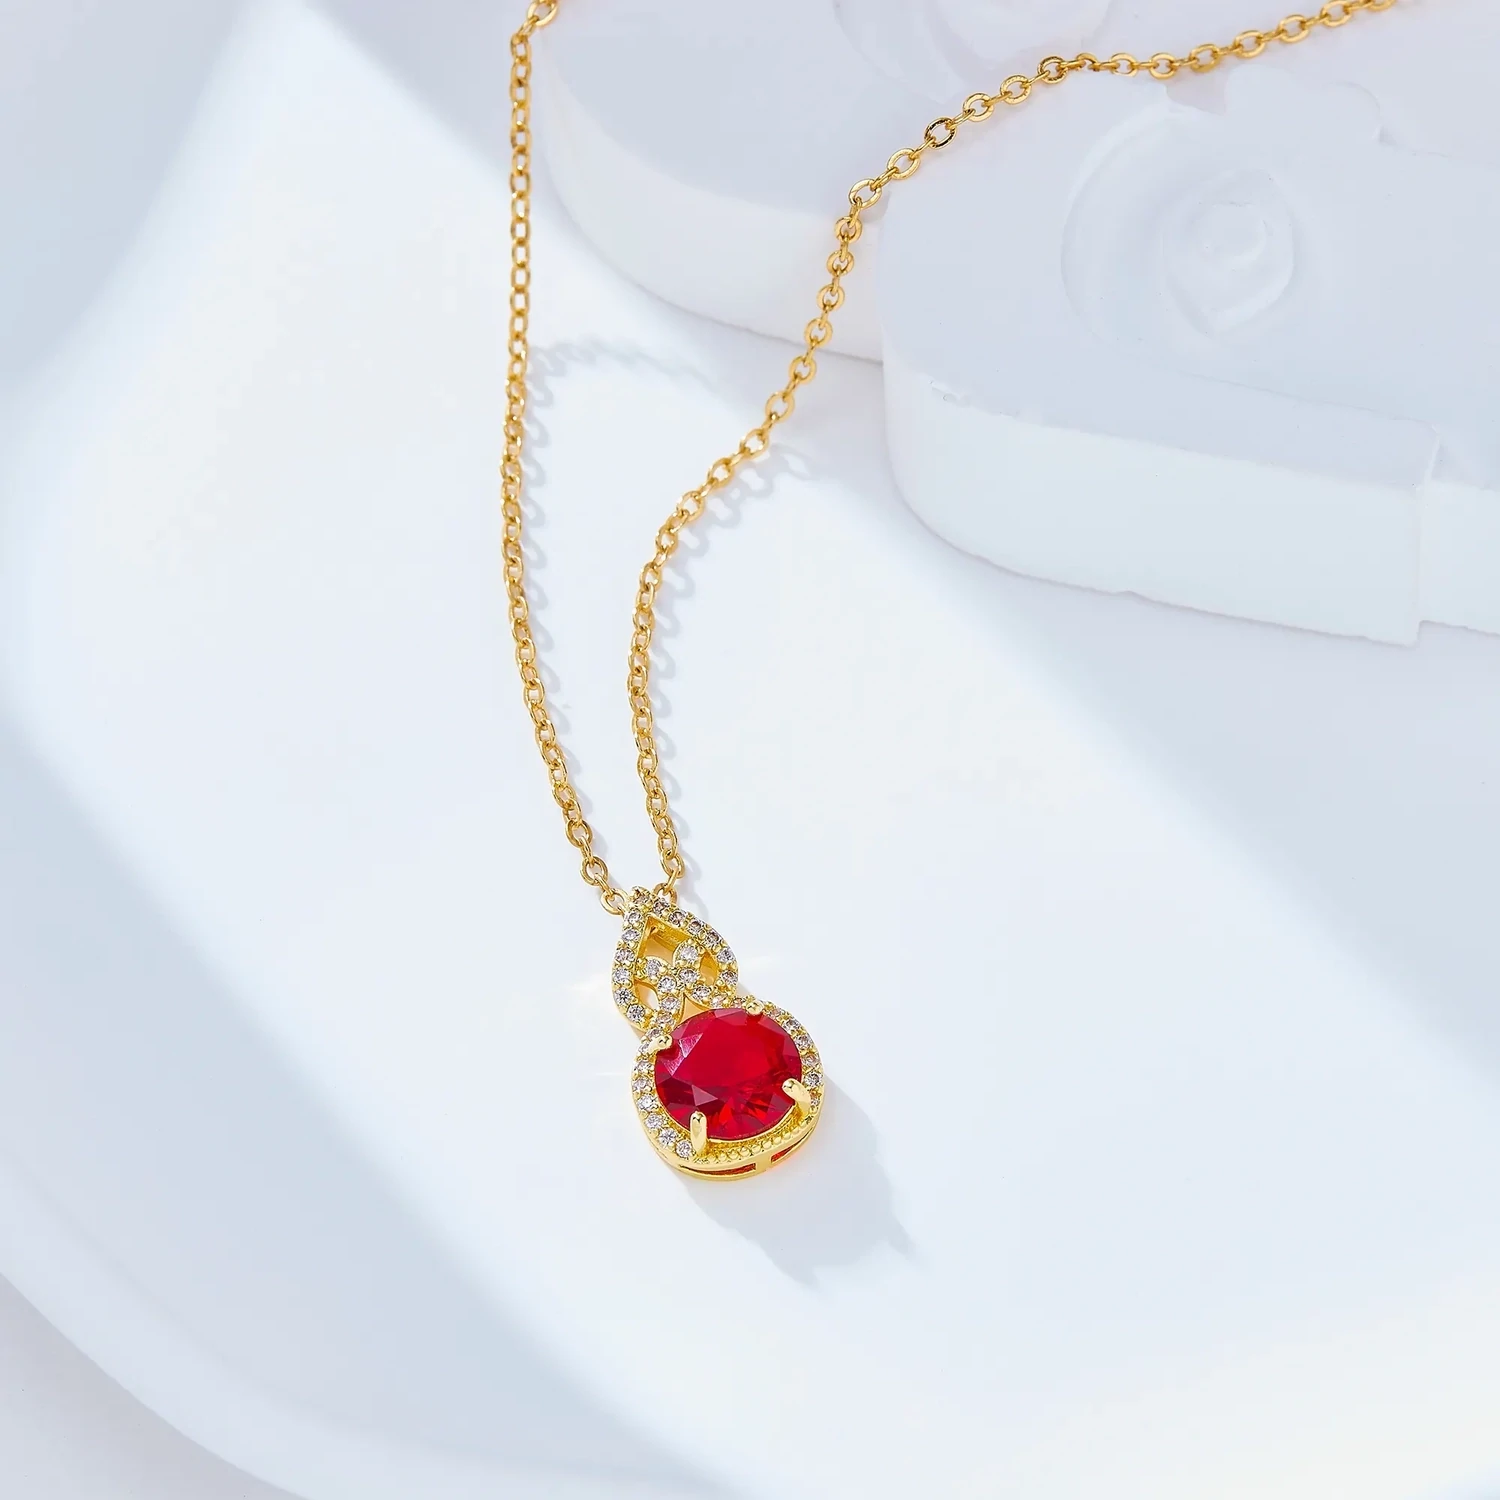 Women Personalized 18k Gold Plated colored rainbow crystal zircon gourd shape pendant necklace-161X-Red